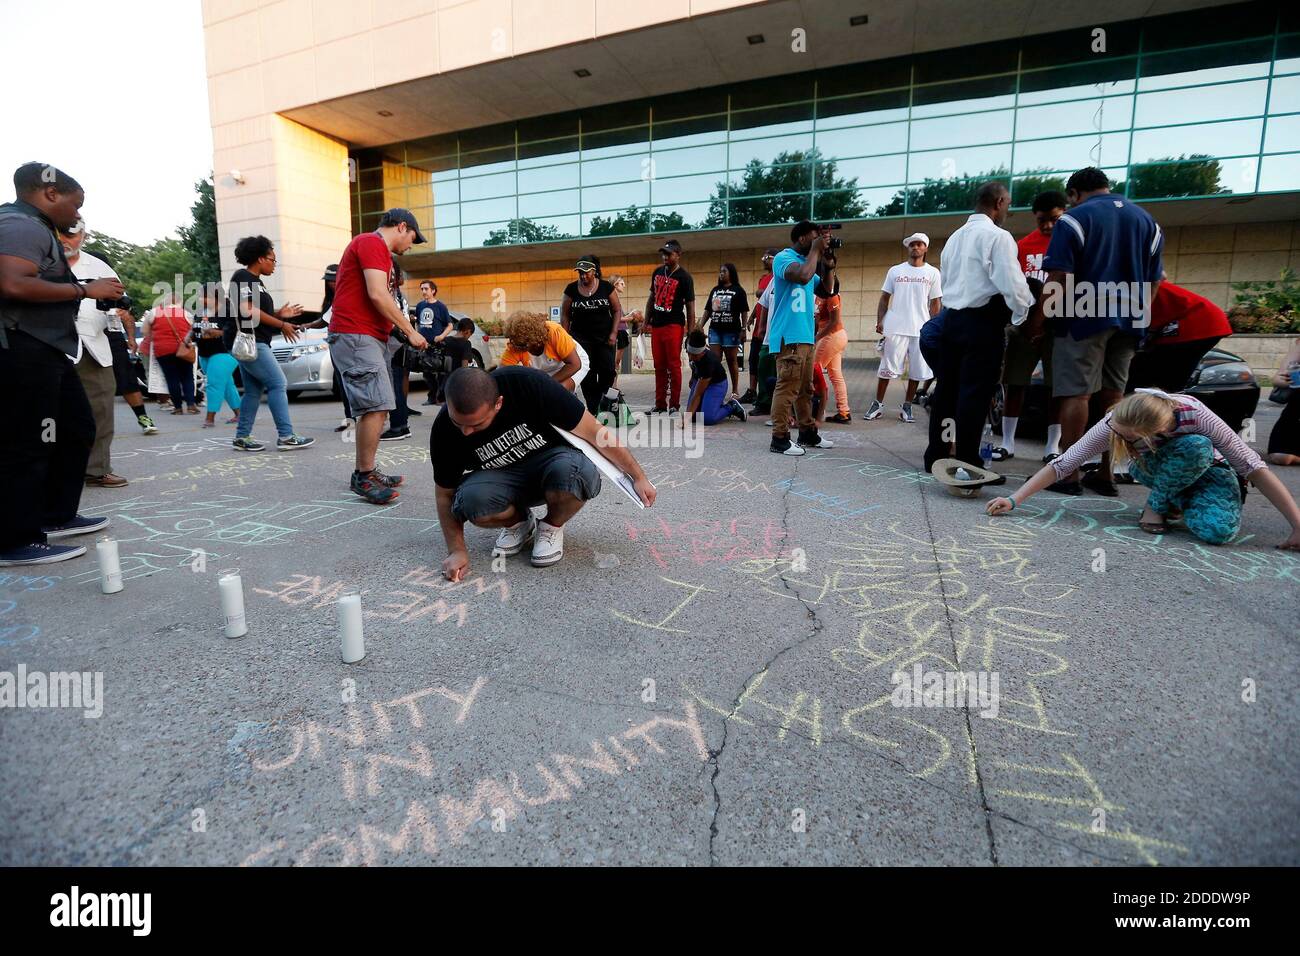 NO FILM, NO VIDEO, NO TV, NO DOCUMENTARY - Demonstrators use chalk to write messages in the parking lot of the Arlington Police Station on Monday, Aug. 10, 2015. The demonstrators gathered to protest the fatal shooting of burglary suspect Christian Taylor by rookie Arlington police officer Brad Miller early Friday morning. Photo by Brandon Wade/Fort Worth Star-Telegram/TNS/ABACAPRESS.COM Stock Photo